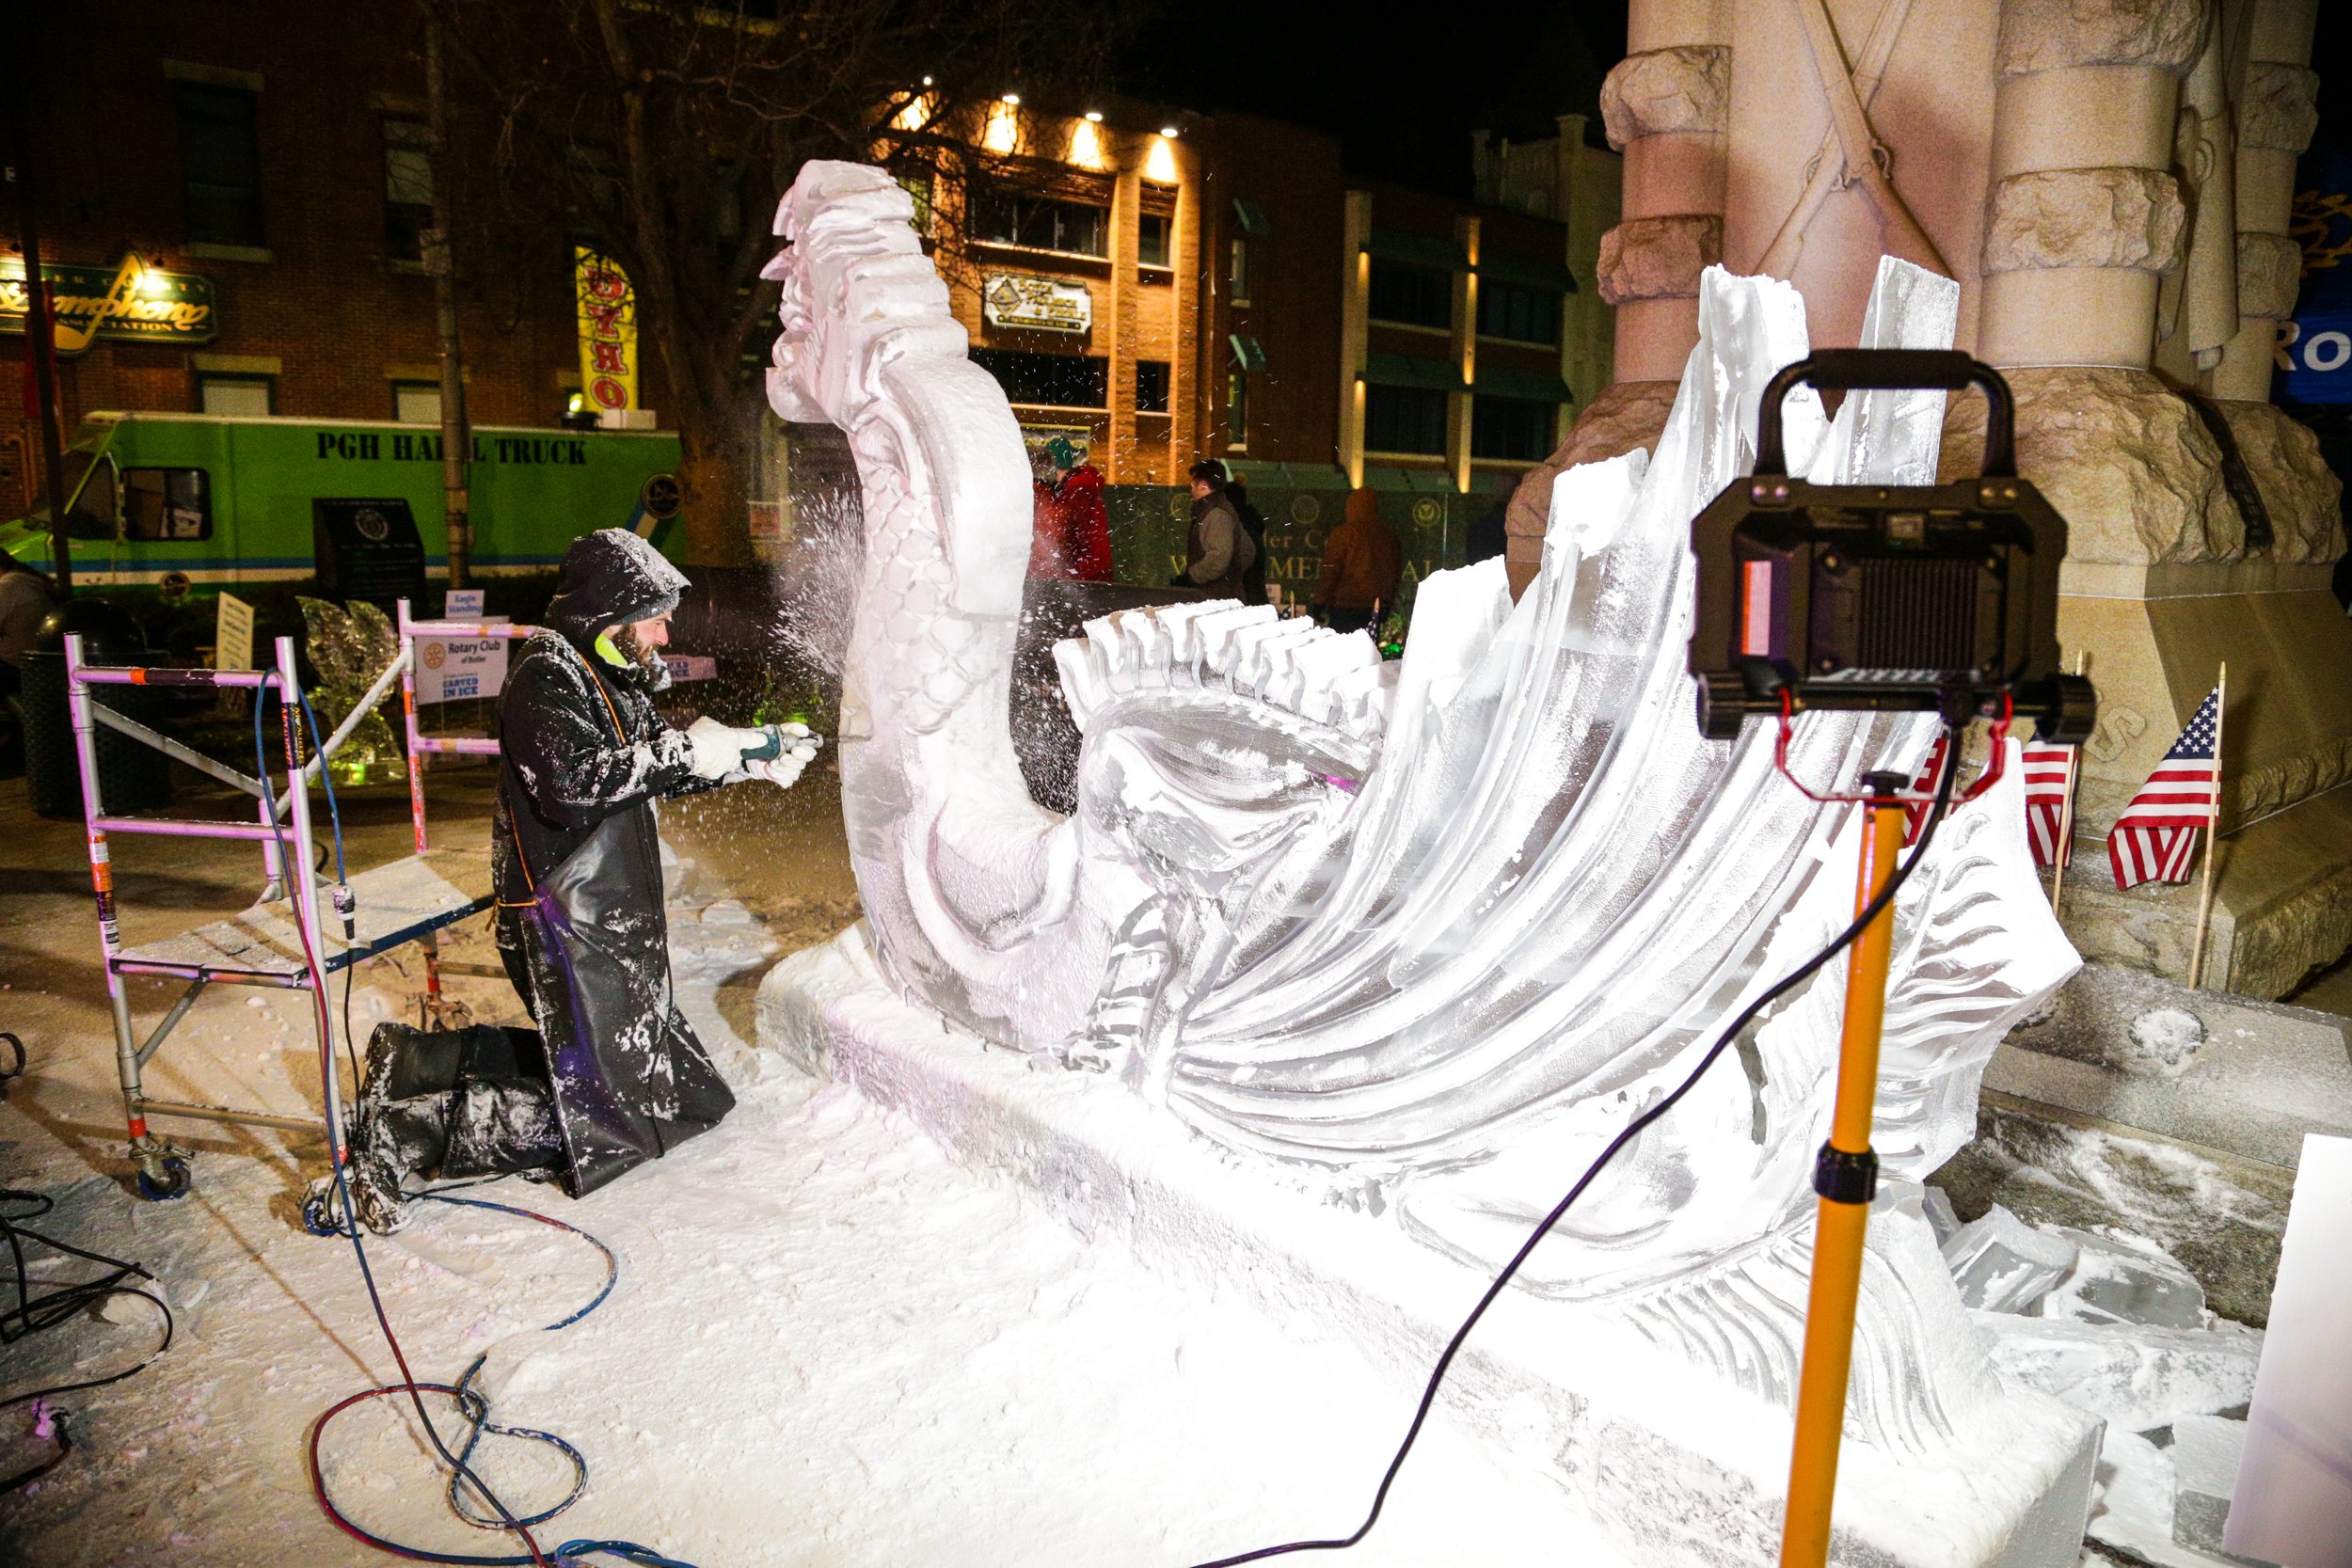 Butler PA Carved in Ice Festival Sculpture